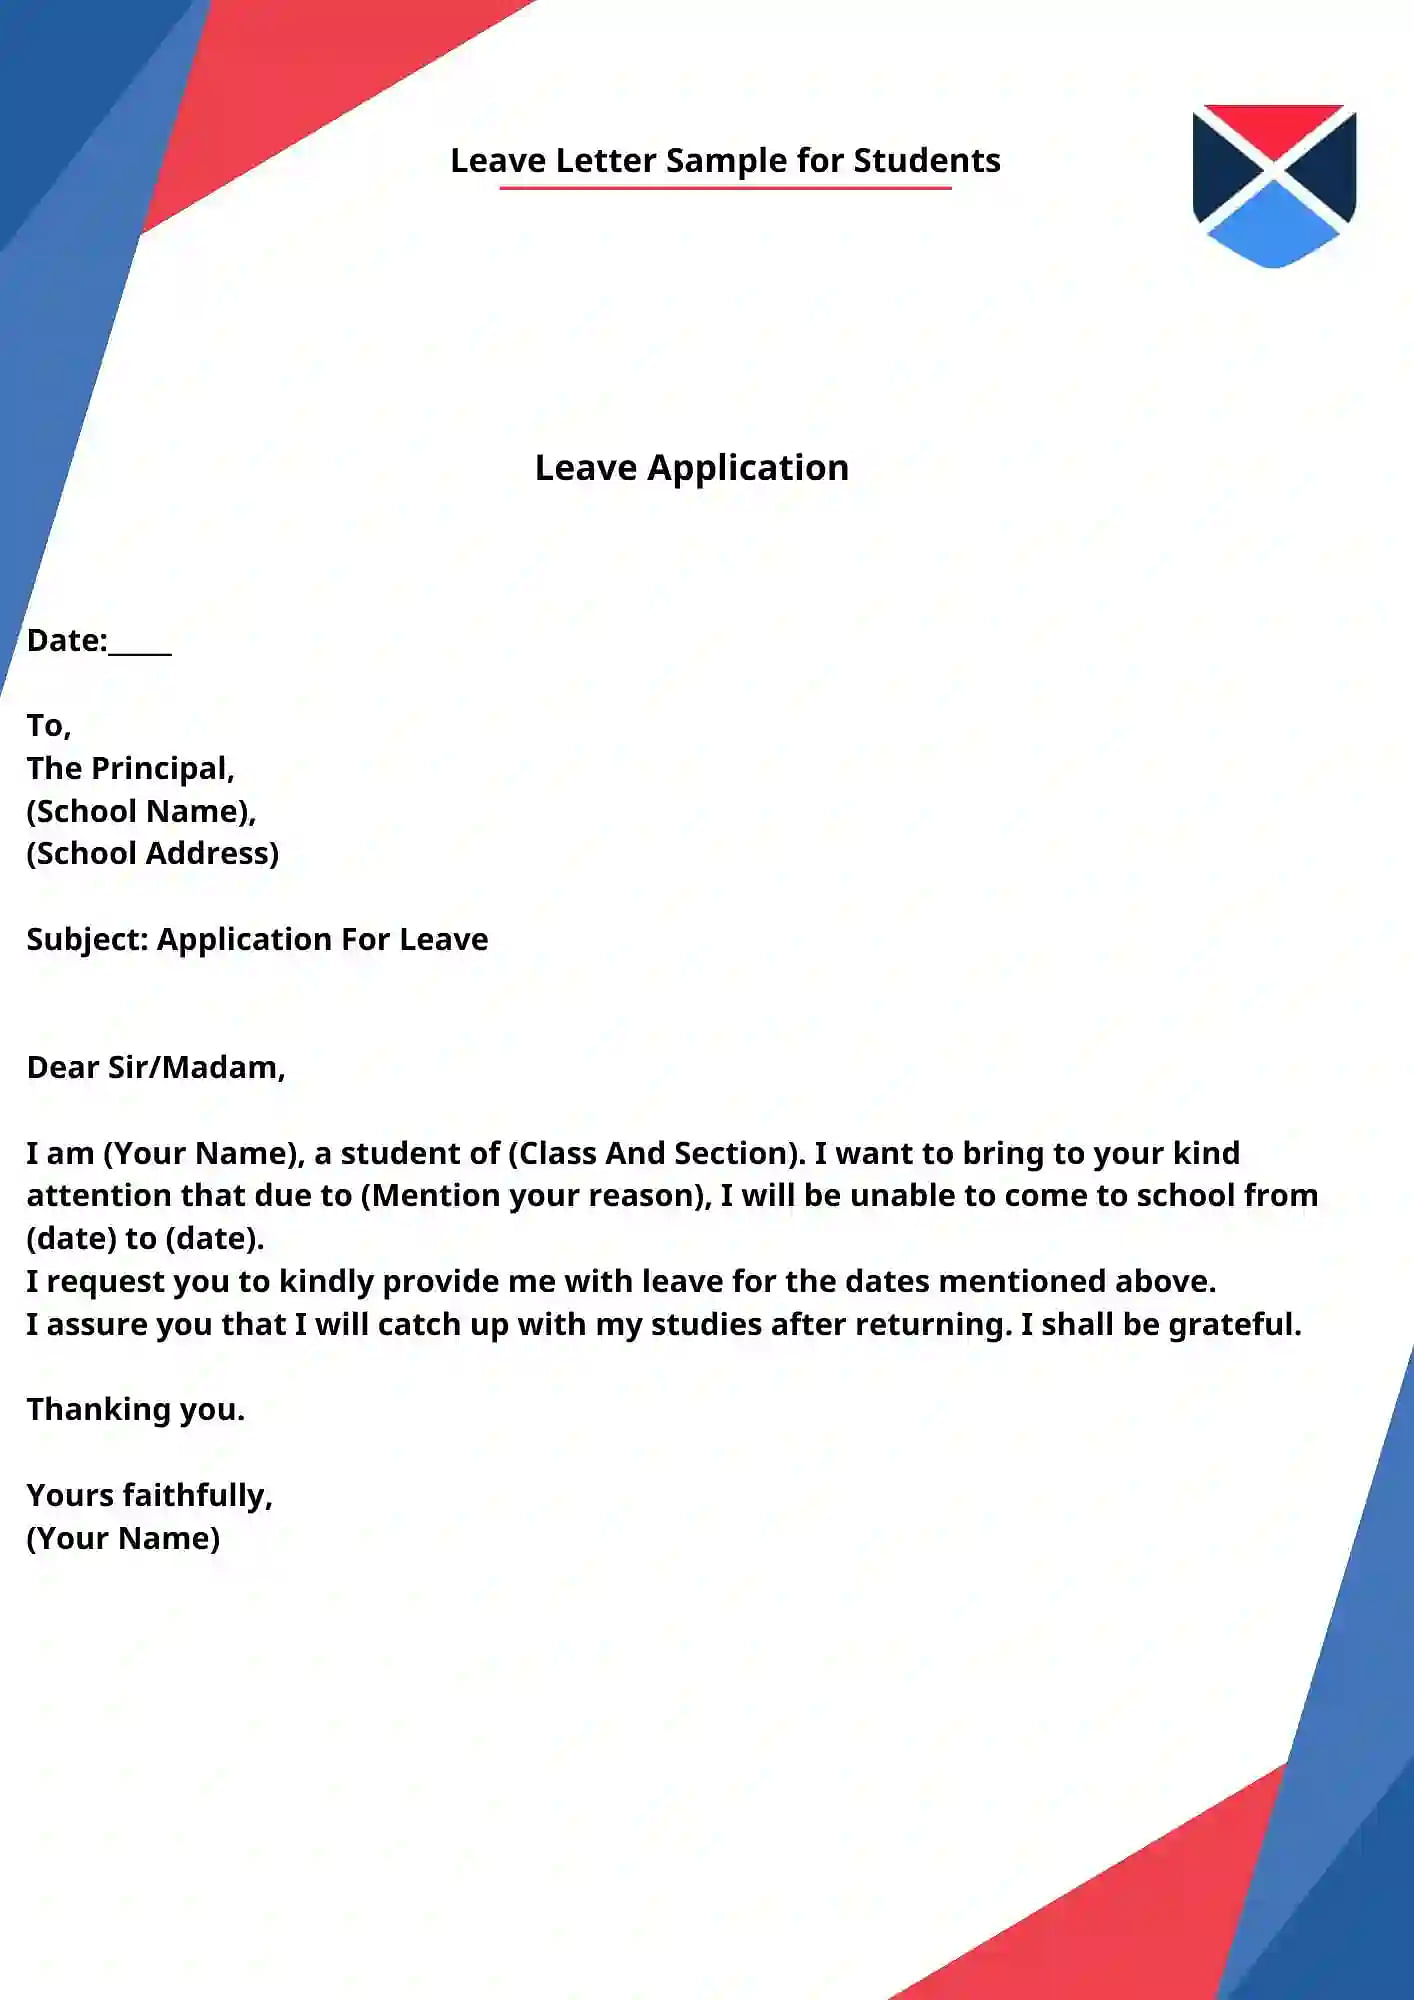 how to write application letter for leave in school